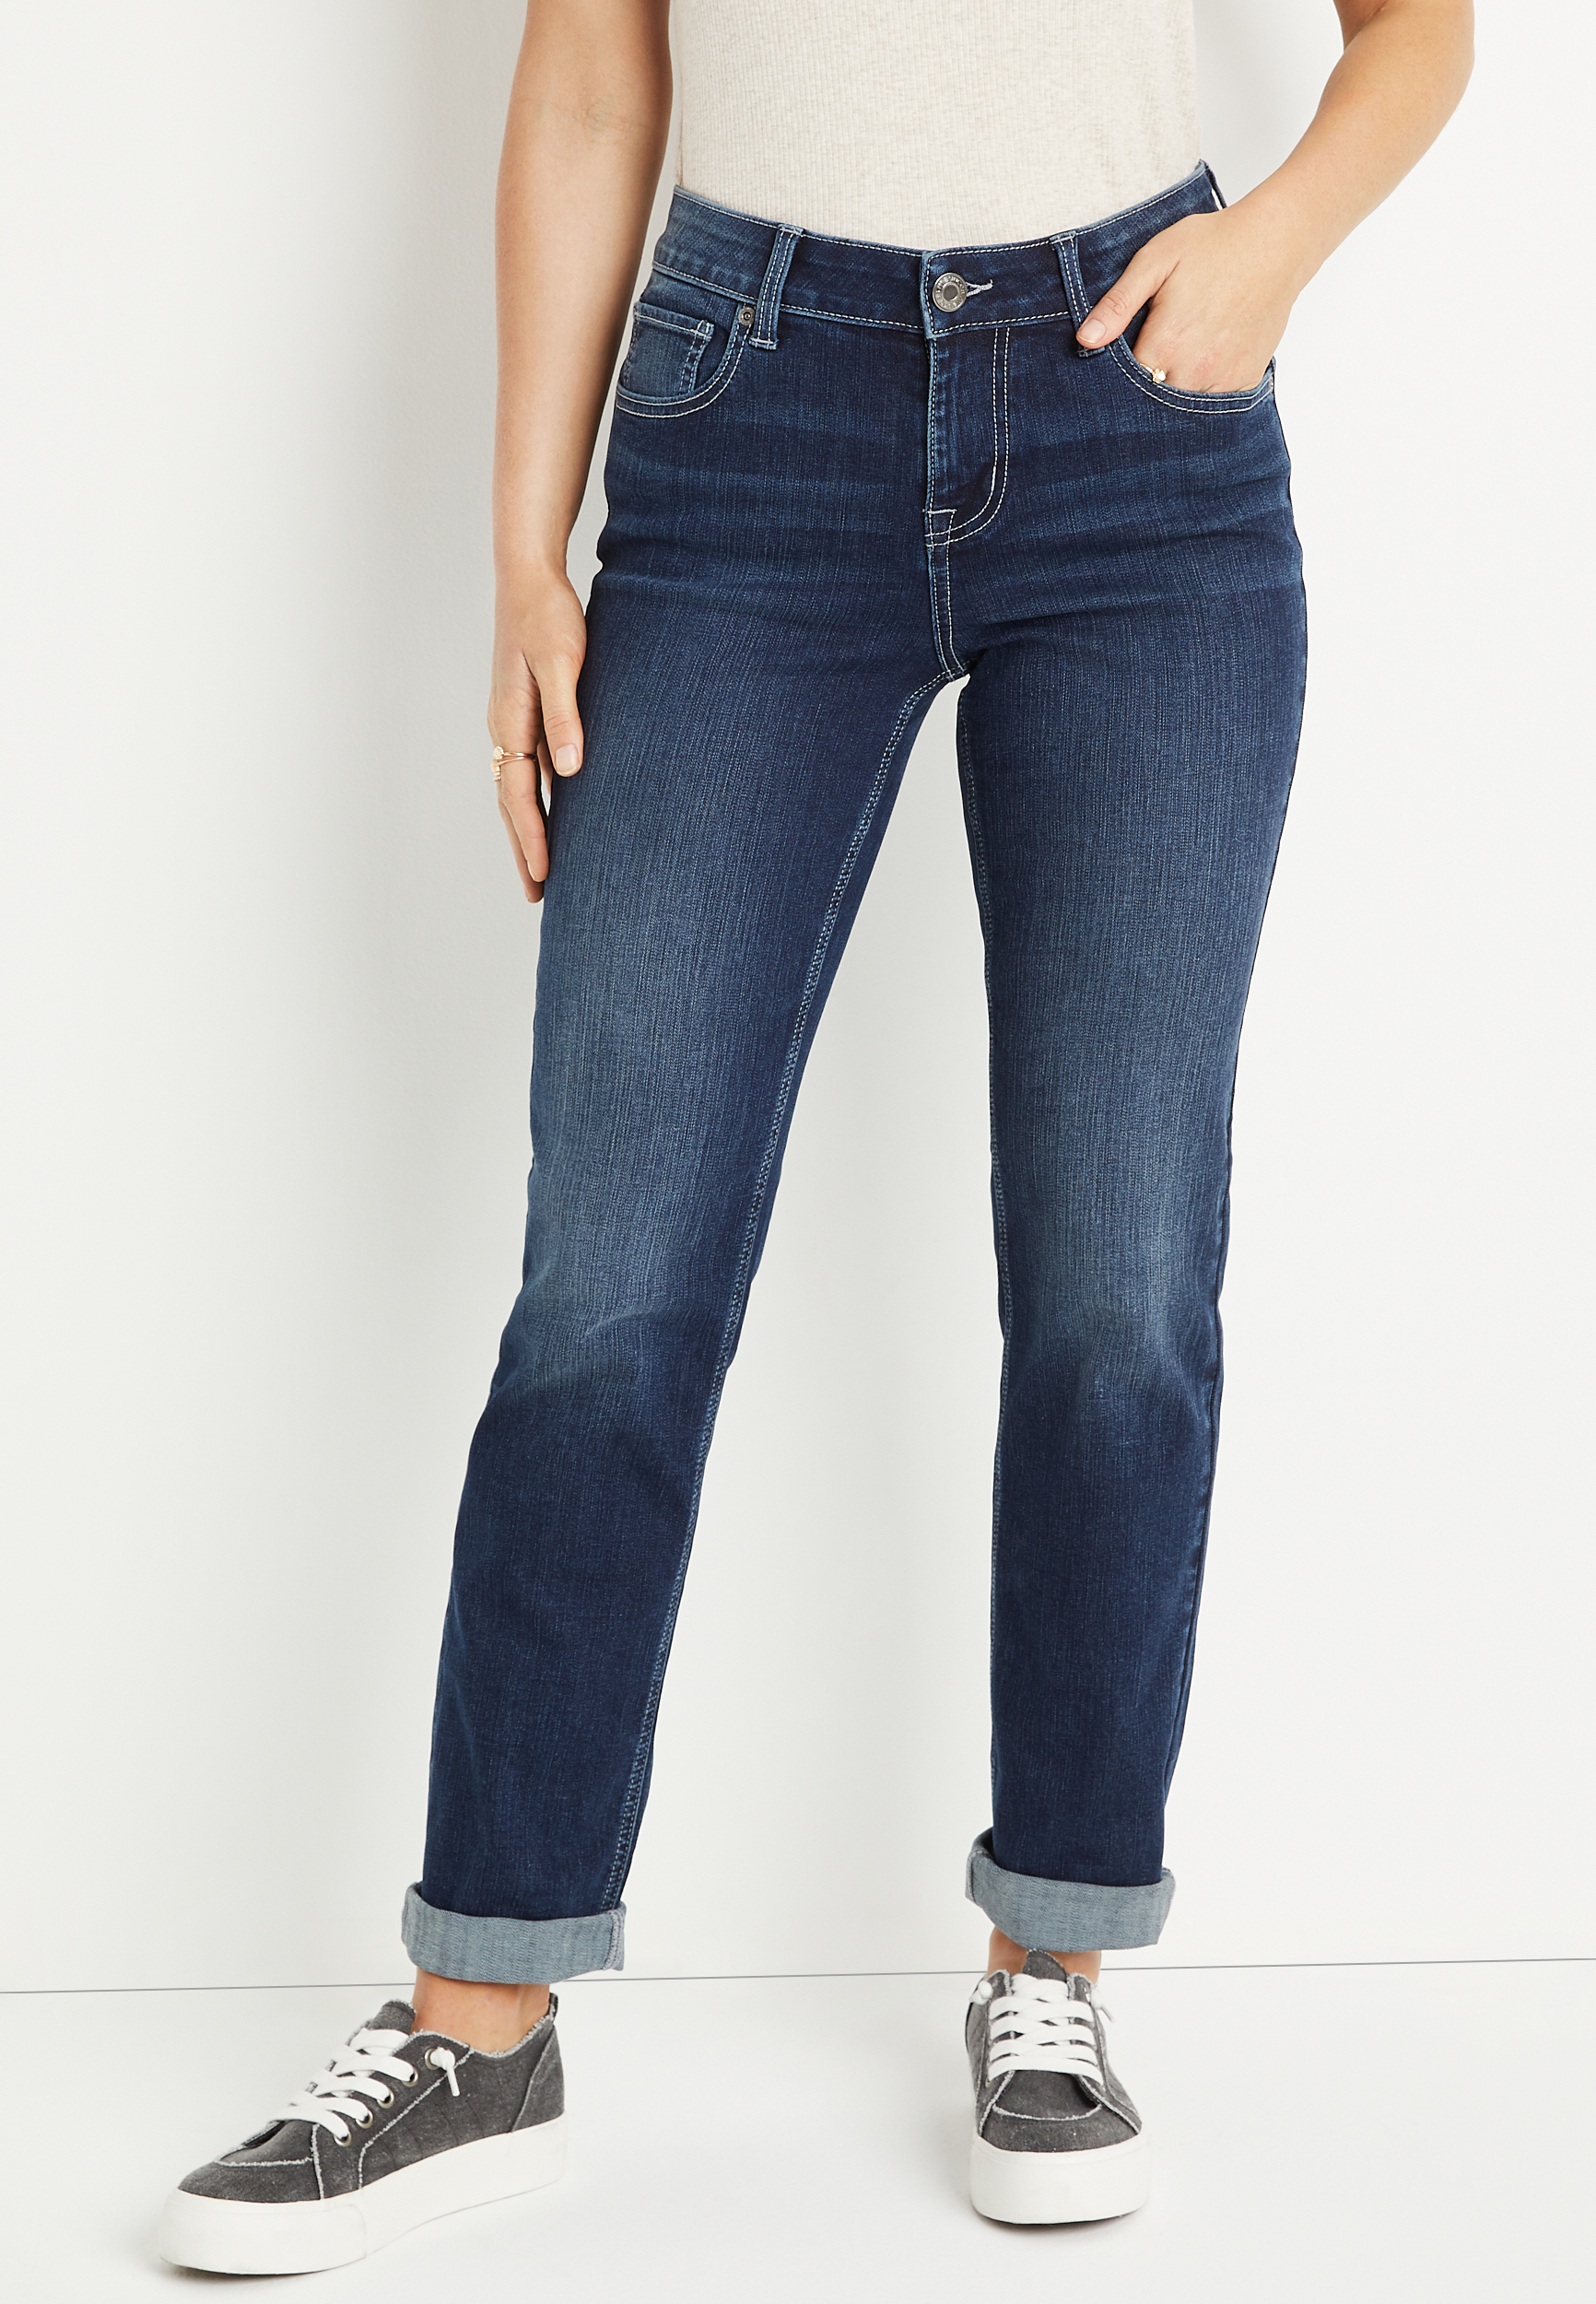 m jeans by maurices™ Classic Straight Mid Rise Jean | maurices